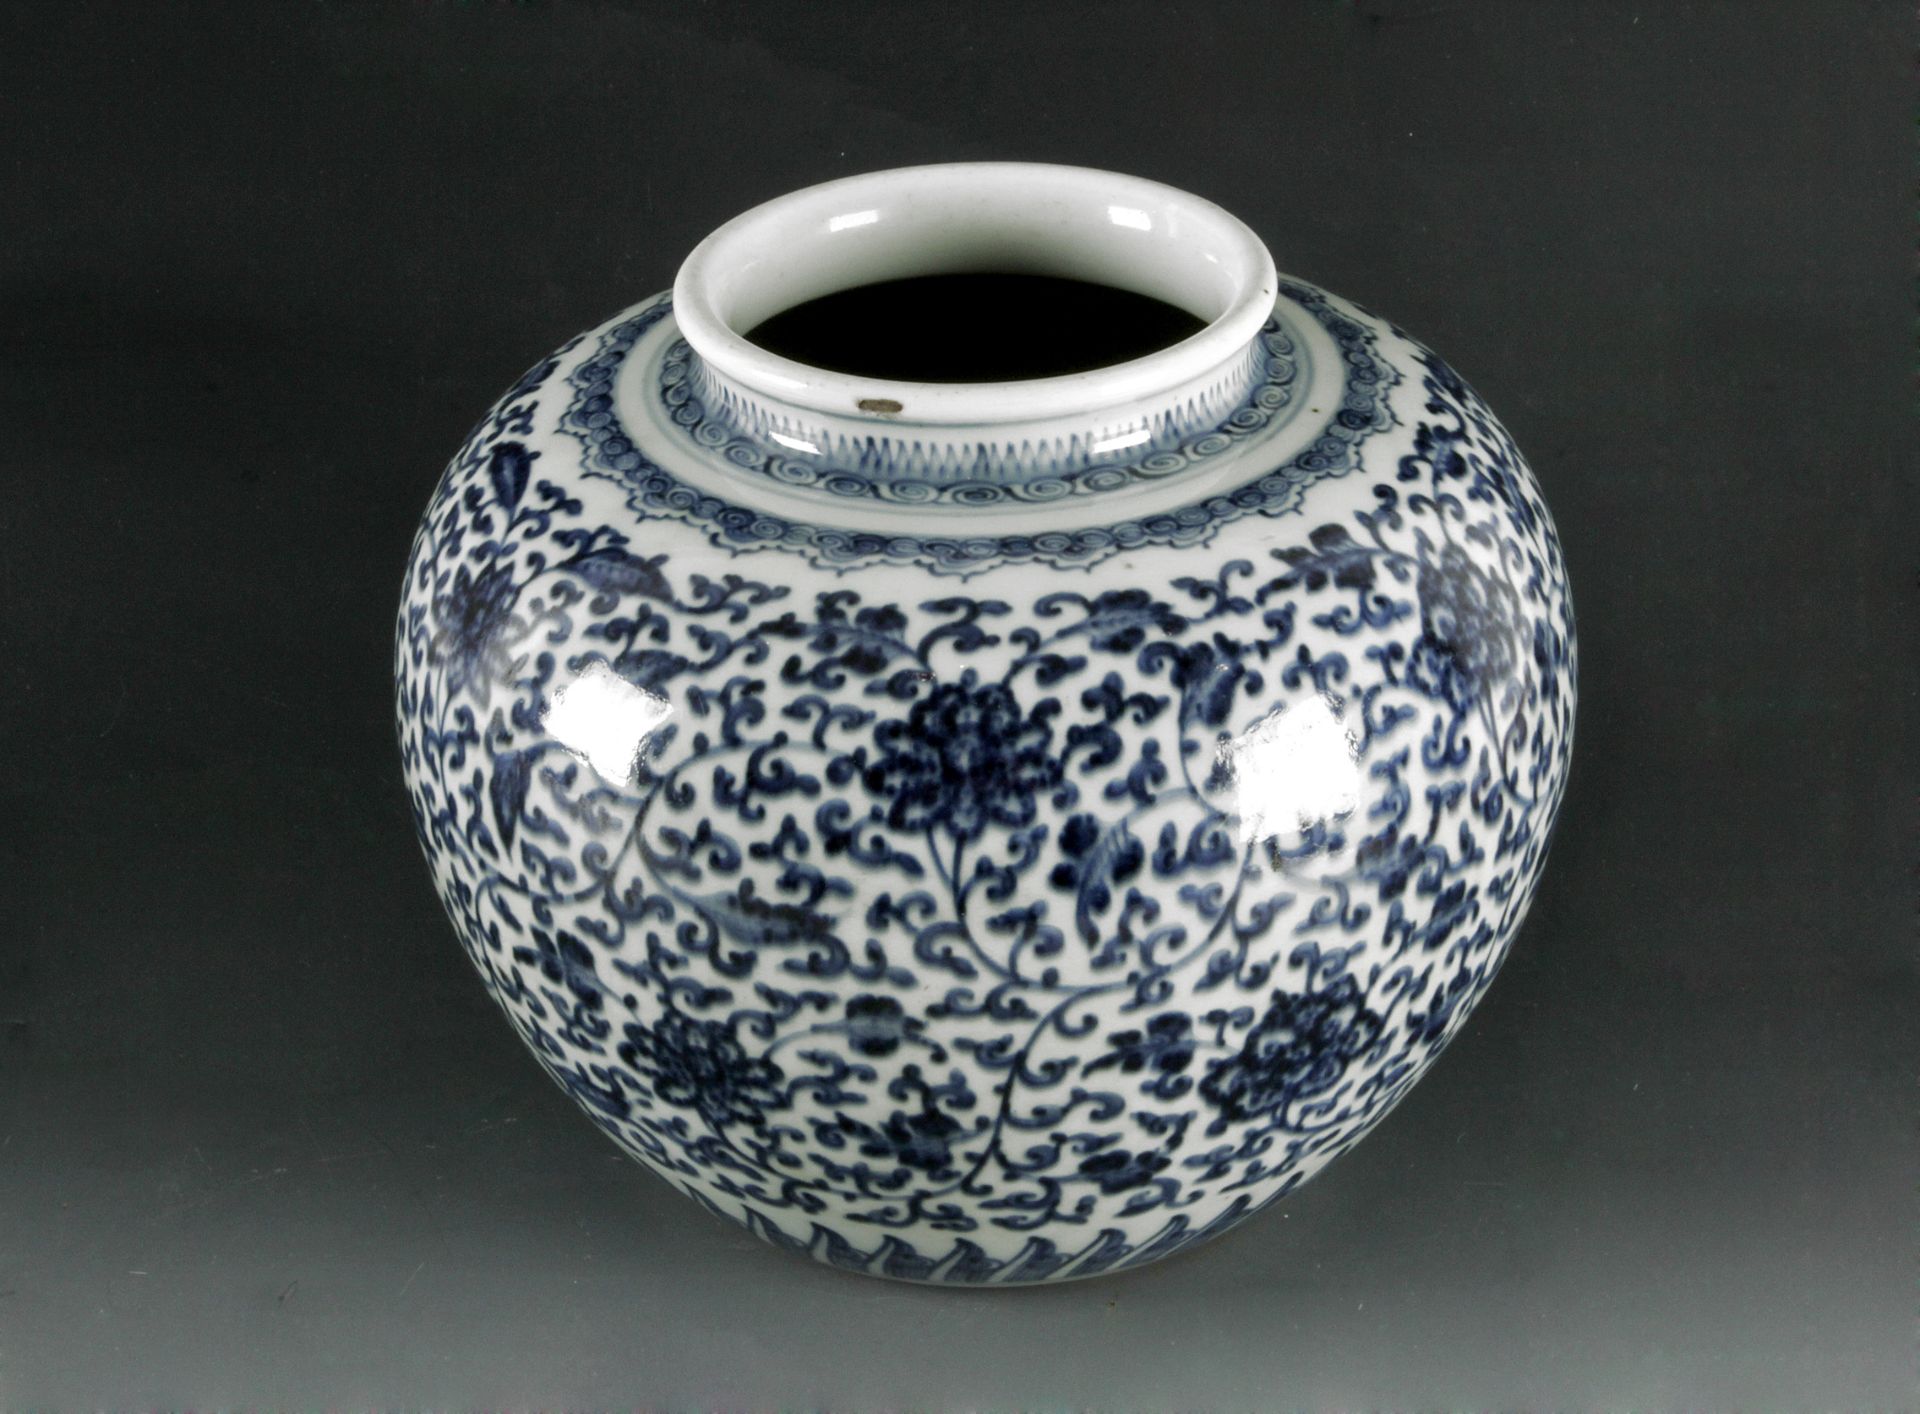 A 19th century Chinese Qing dynasty porcelain vase